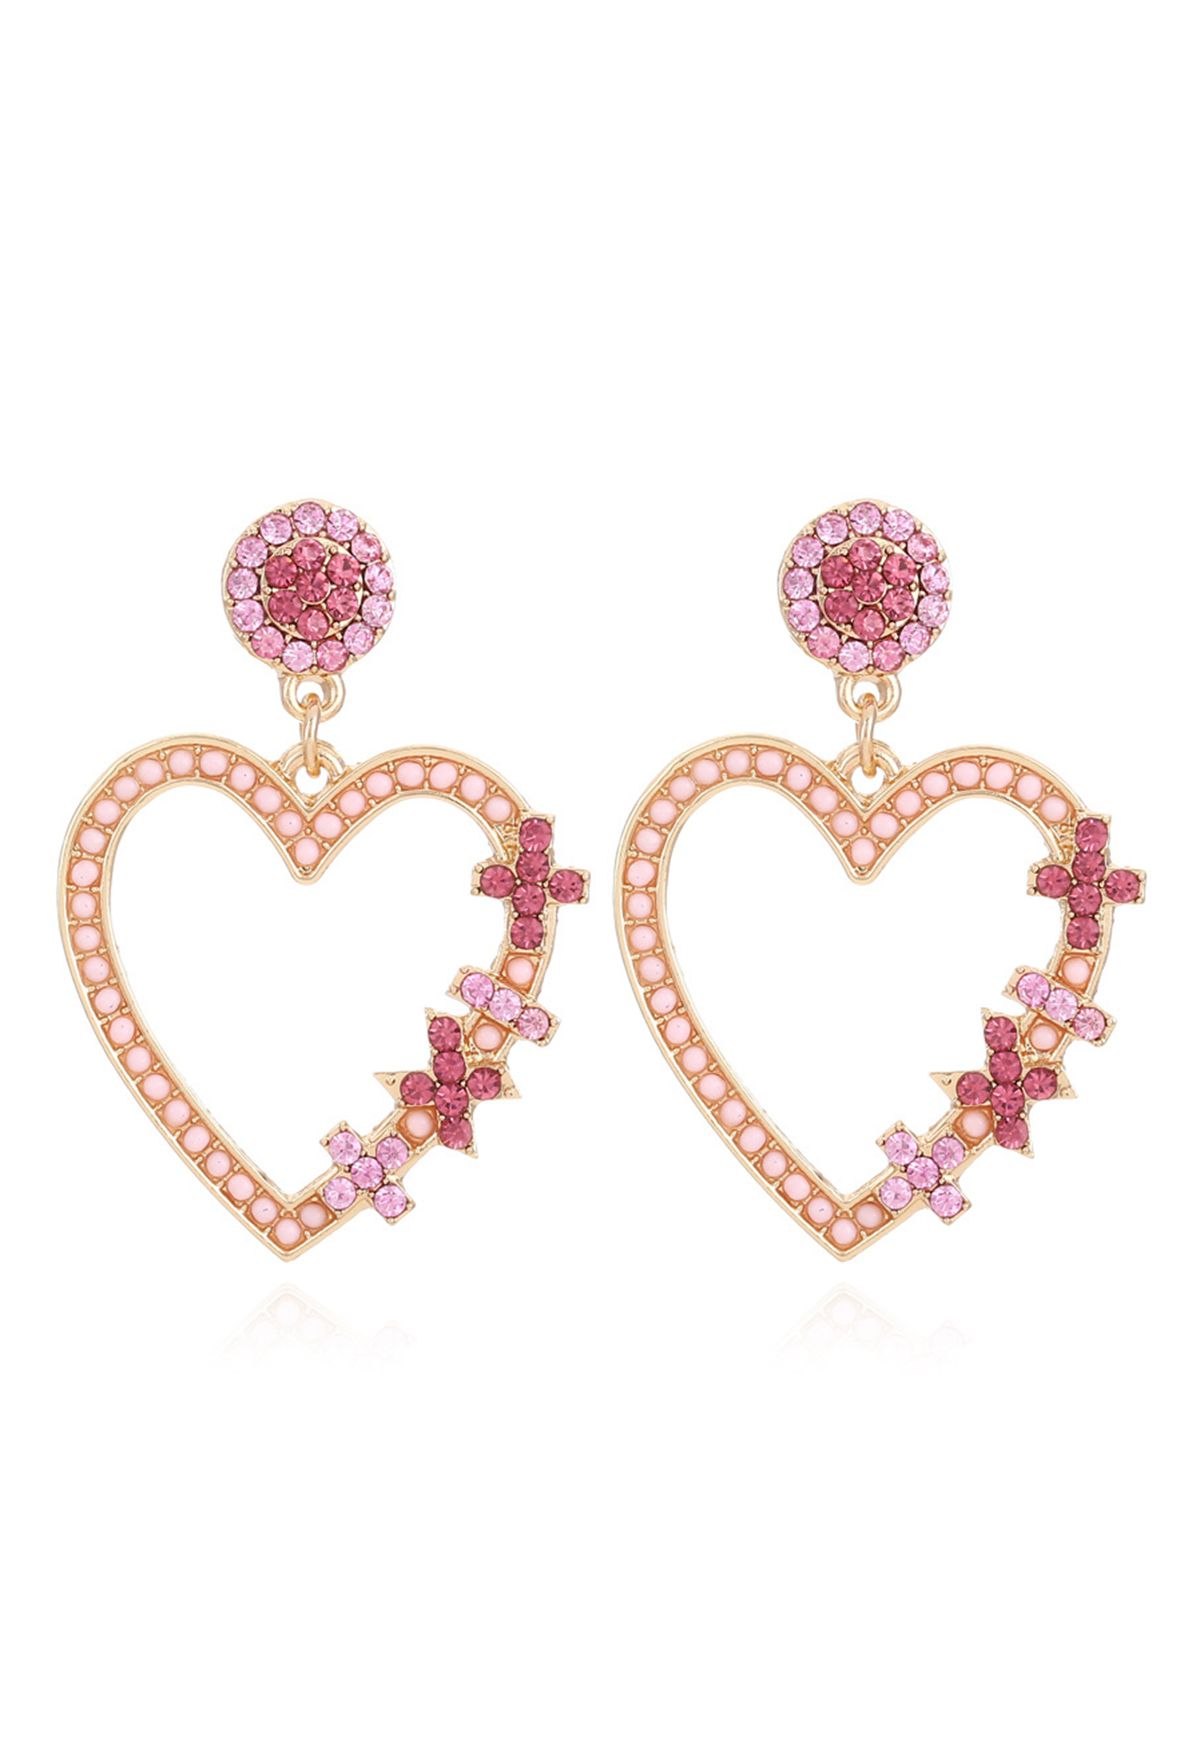 Pink Diamond Heart Hook Earrings - Retro, Indie and Unique Fashion